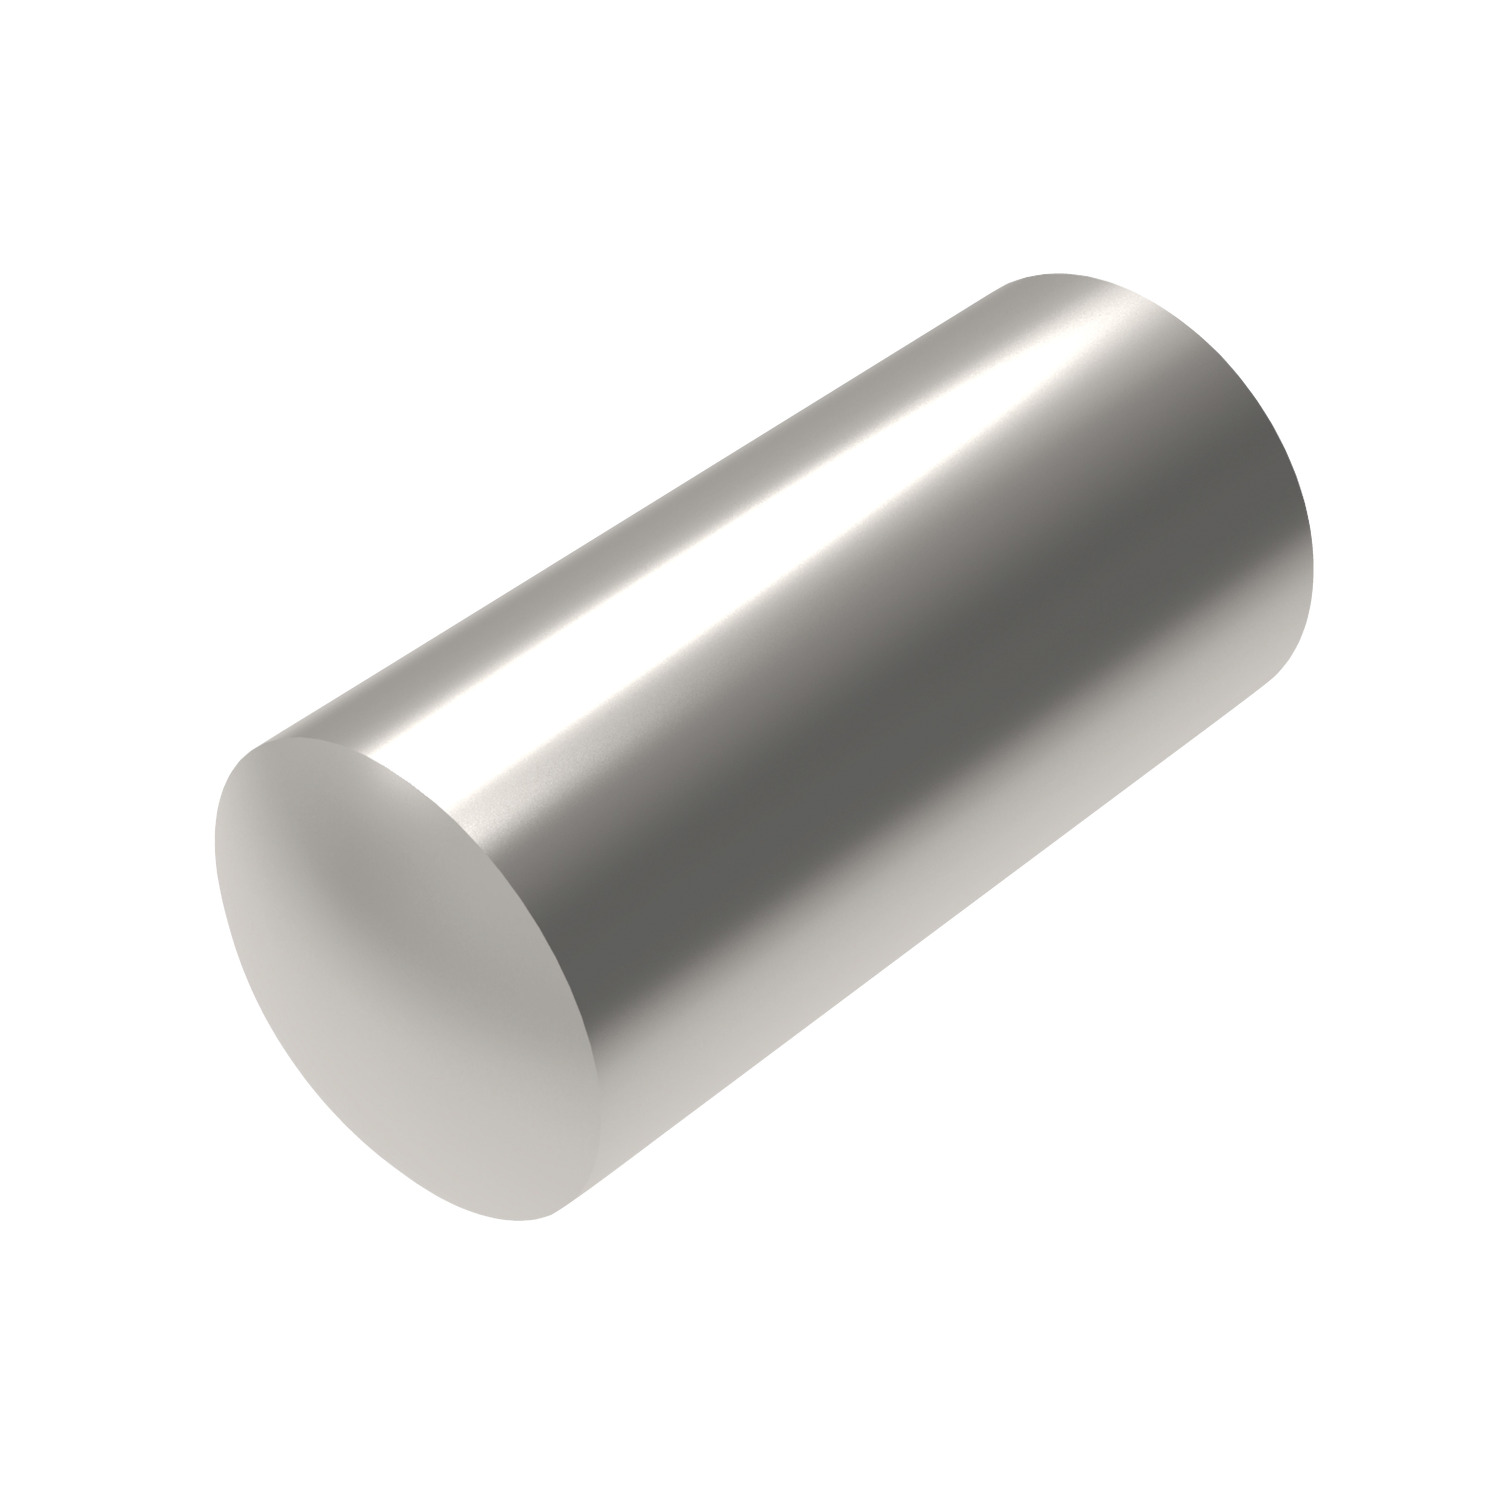 P1207 - Stainless Dowel Pins